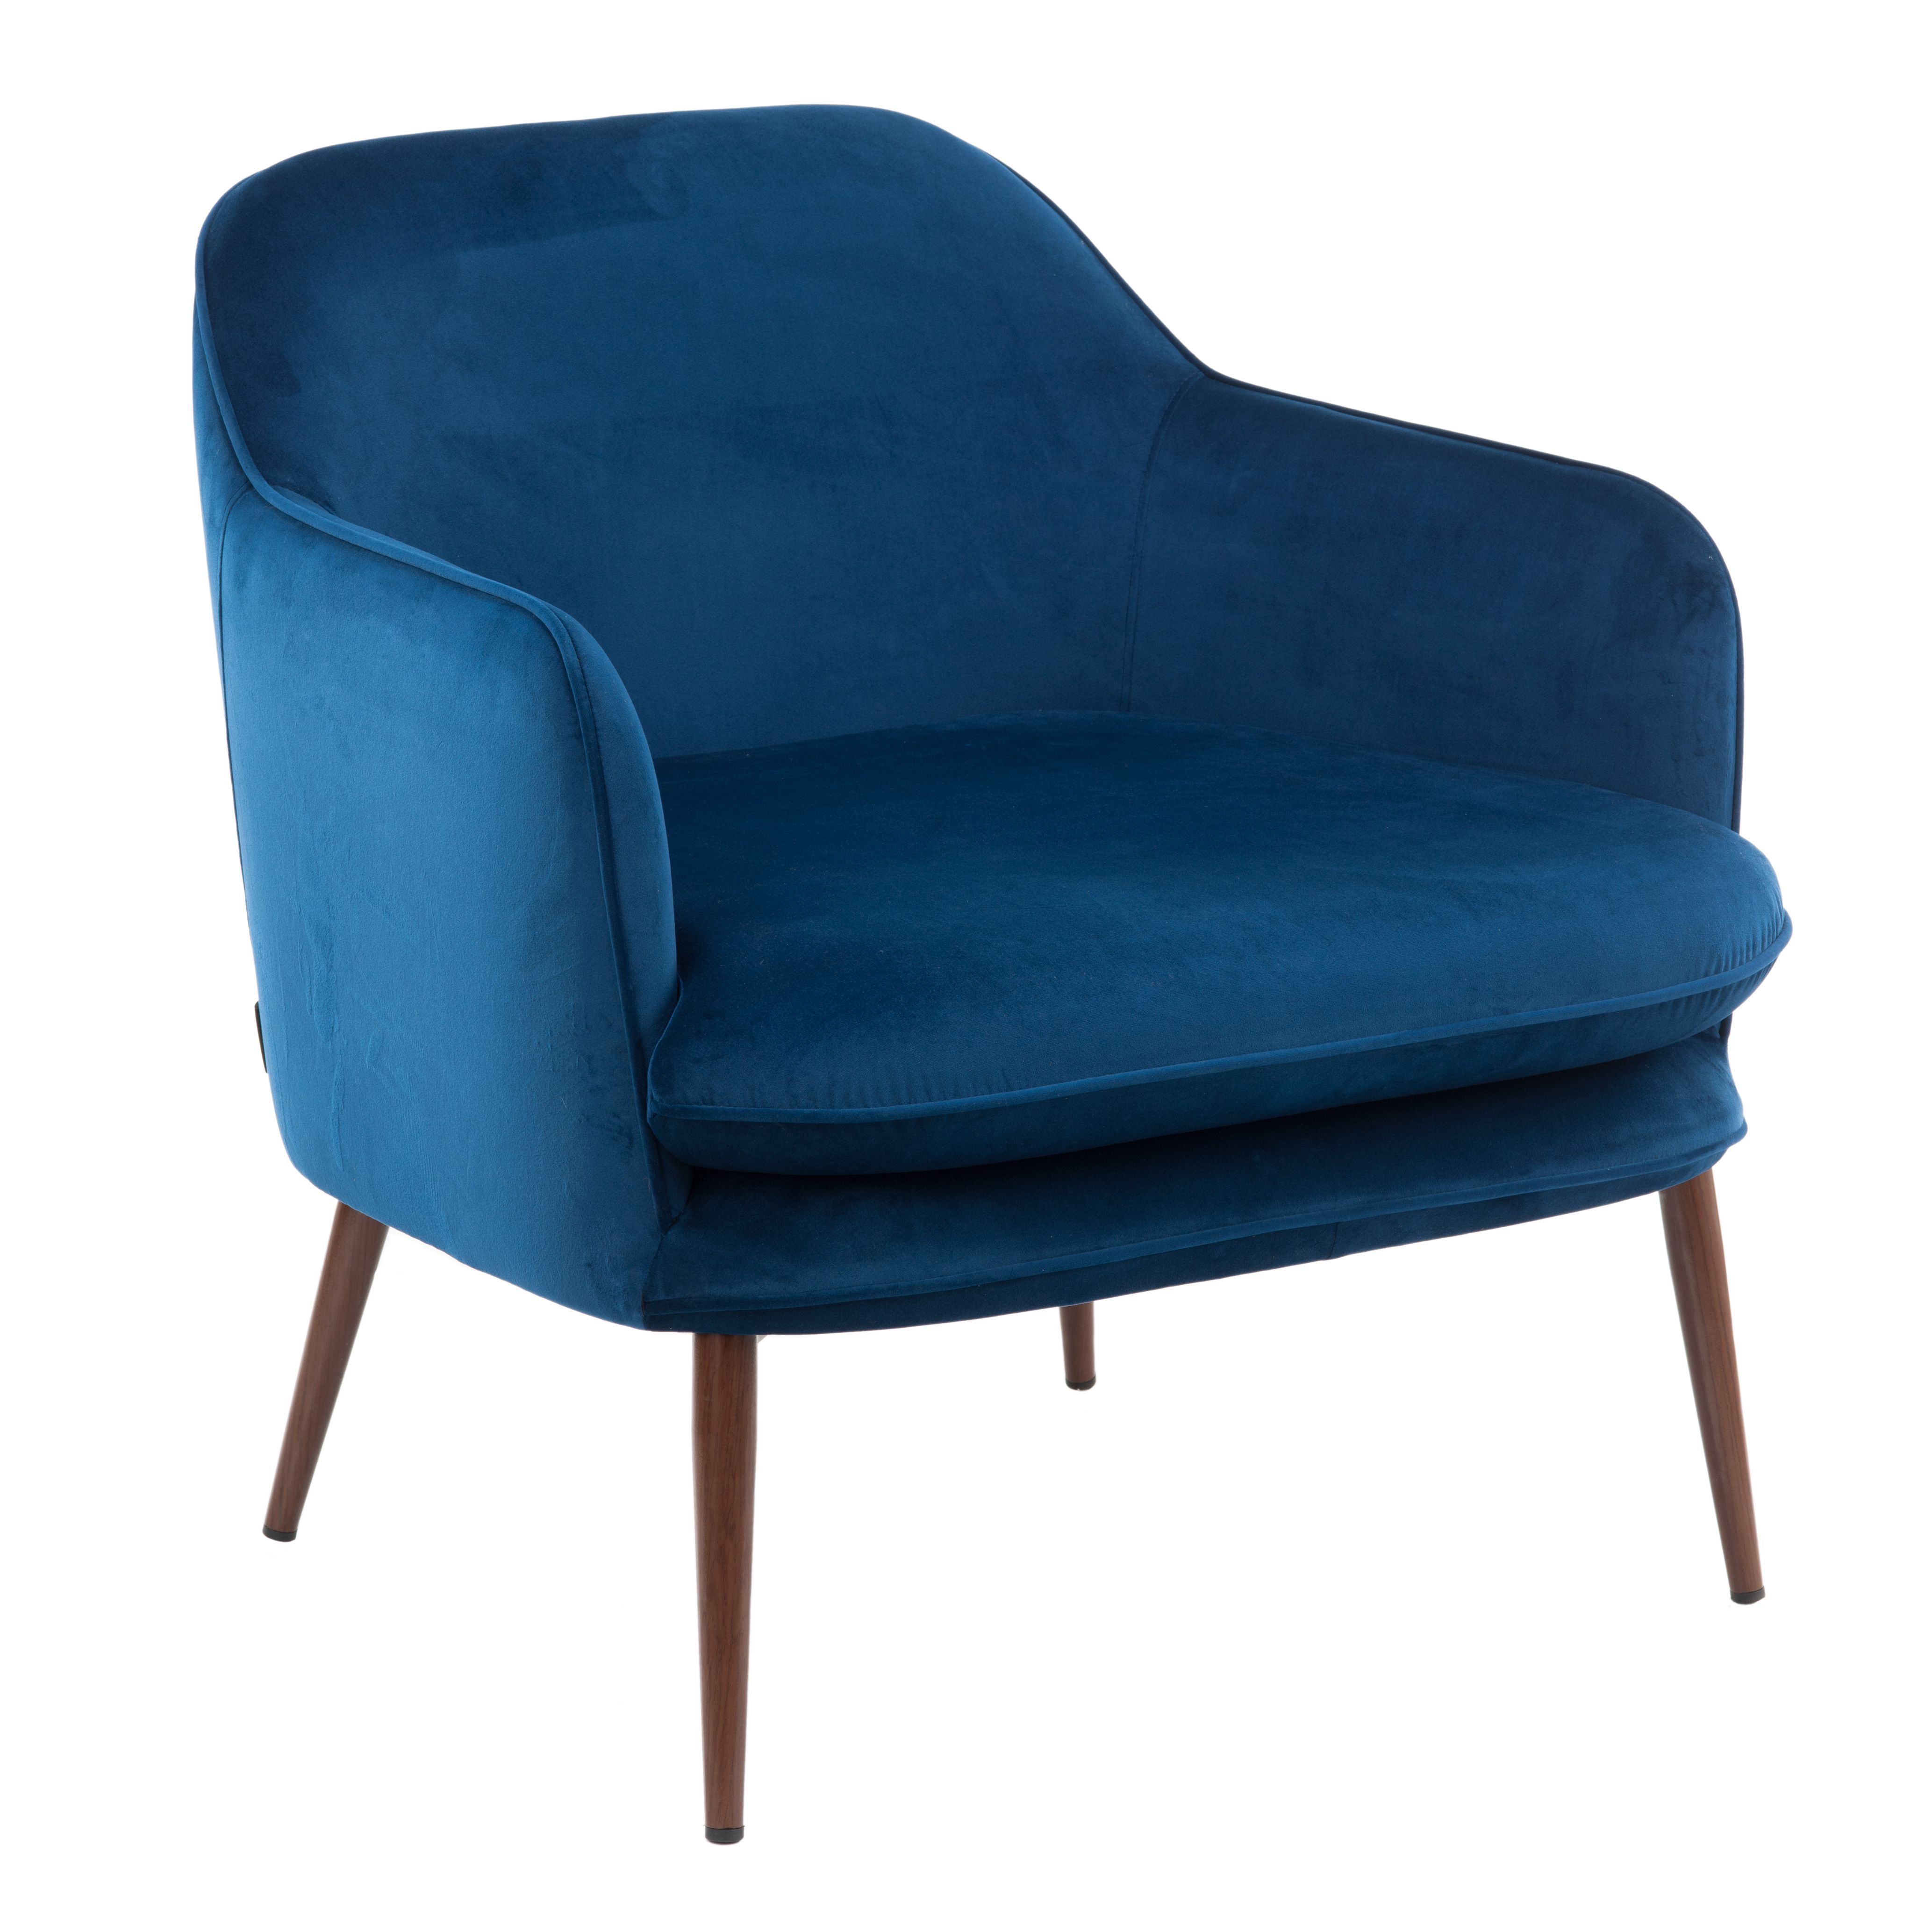 The Charmy by Pols Potten chair